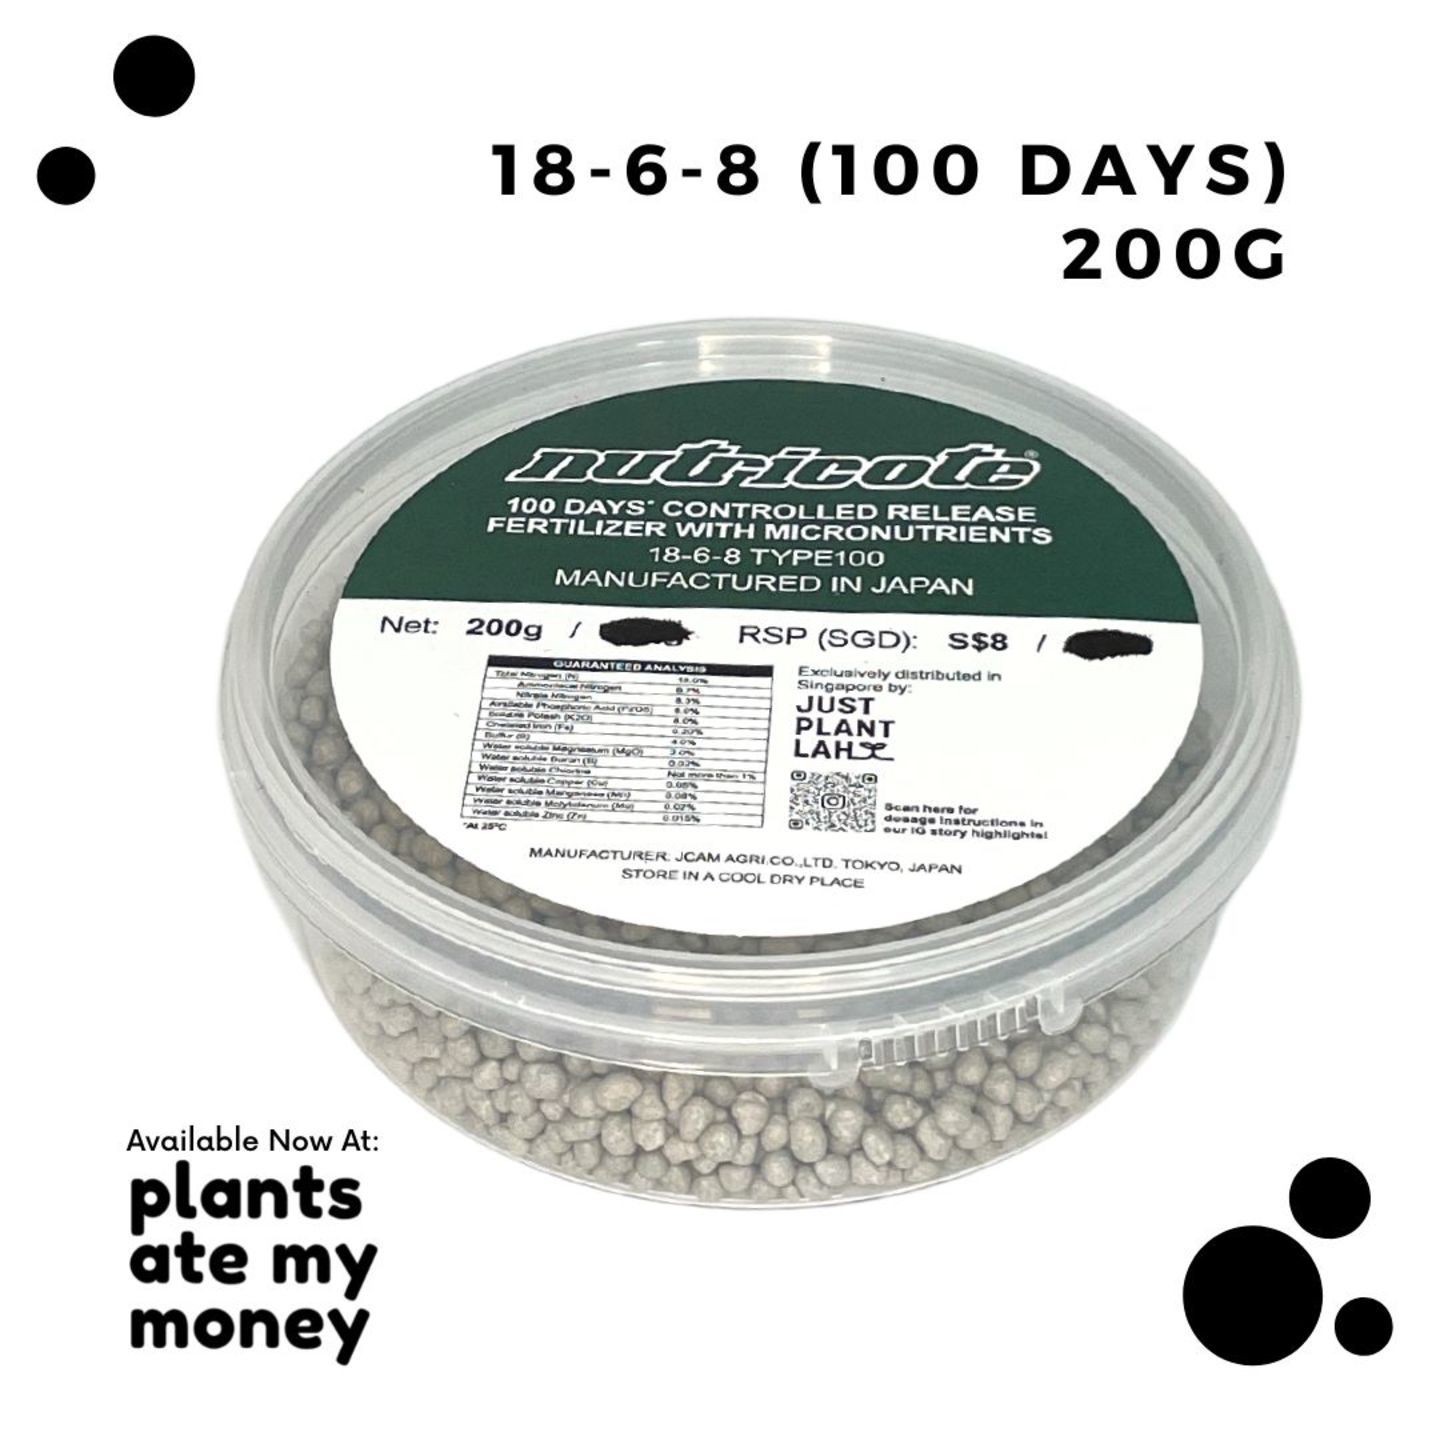 200g - 18-6-8 (100 Days) Nutricote Controlled Release Fertilizer with Micronutrients